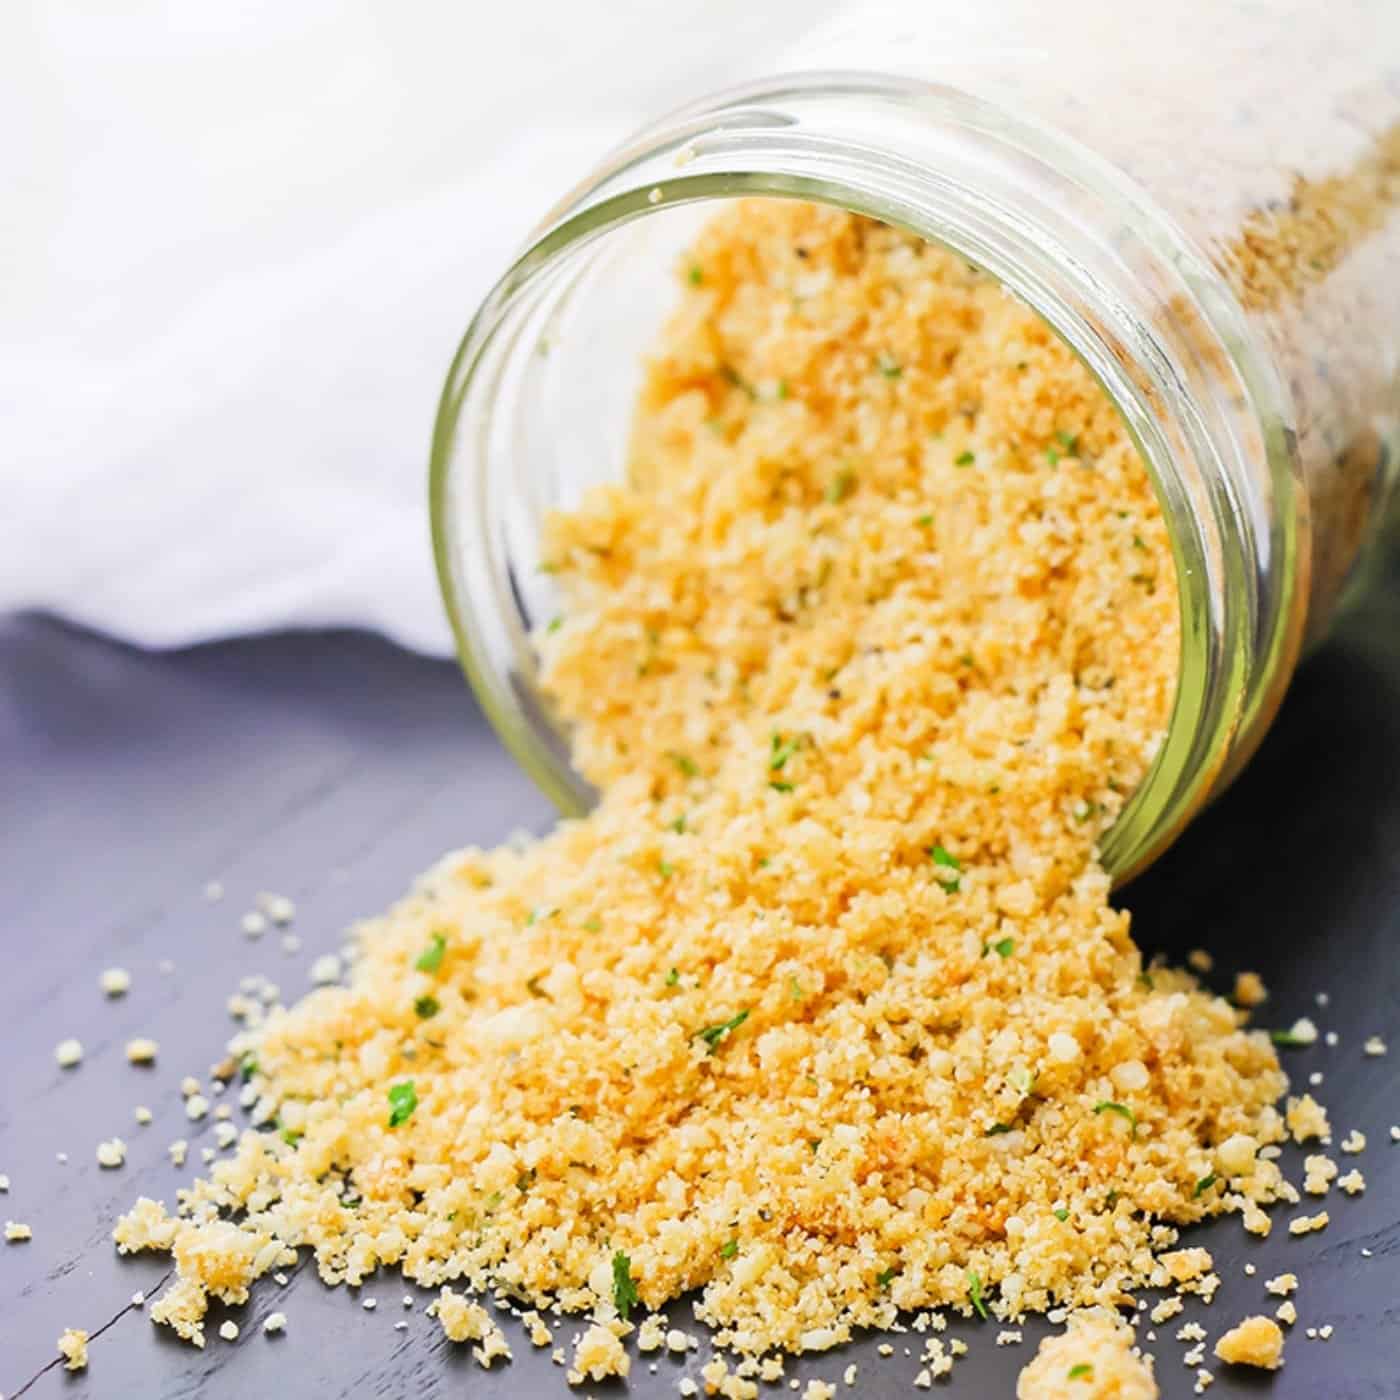 Breadcrumbs made with pork rinds